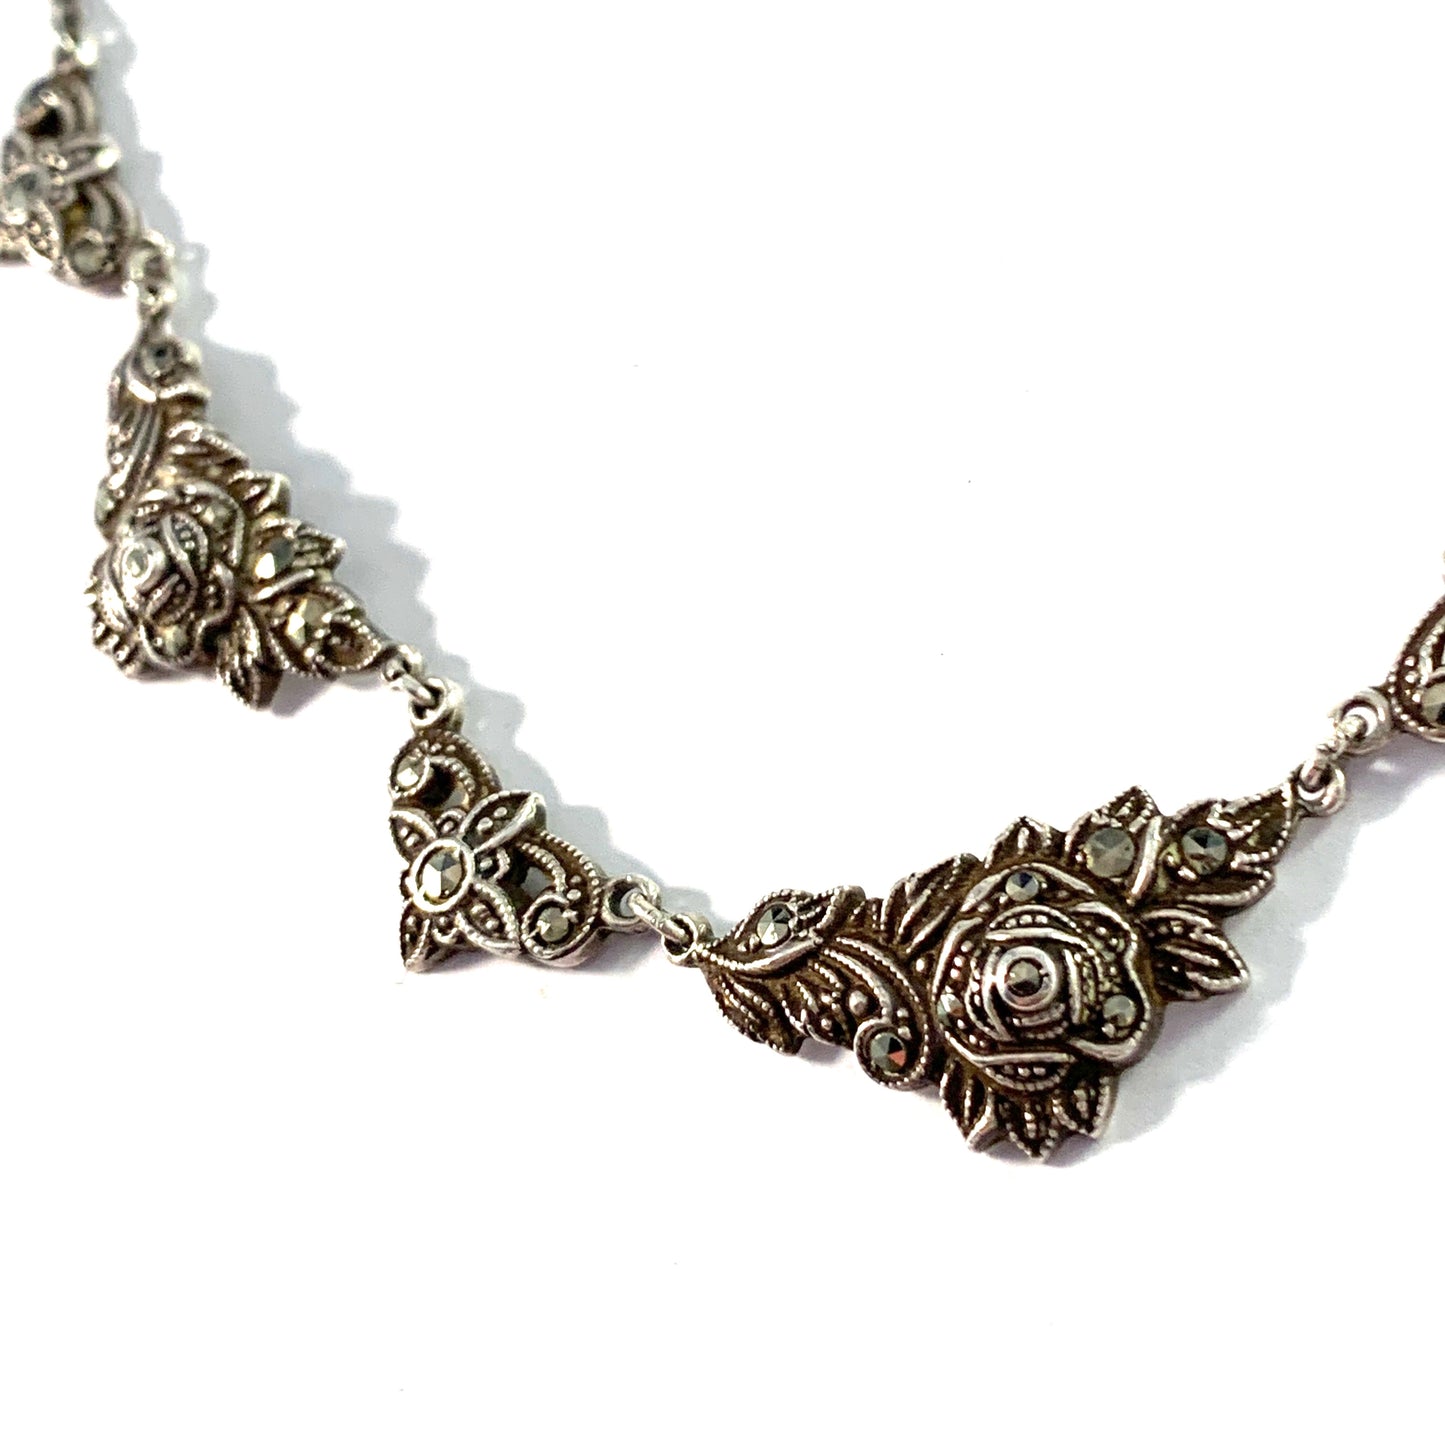 Vintage Mid Century Sterling Silver Marcasite Floral Necklace.